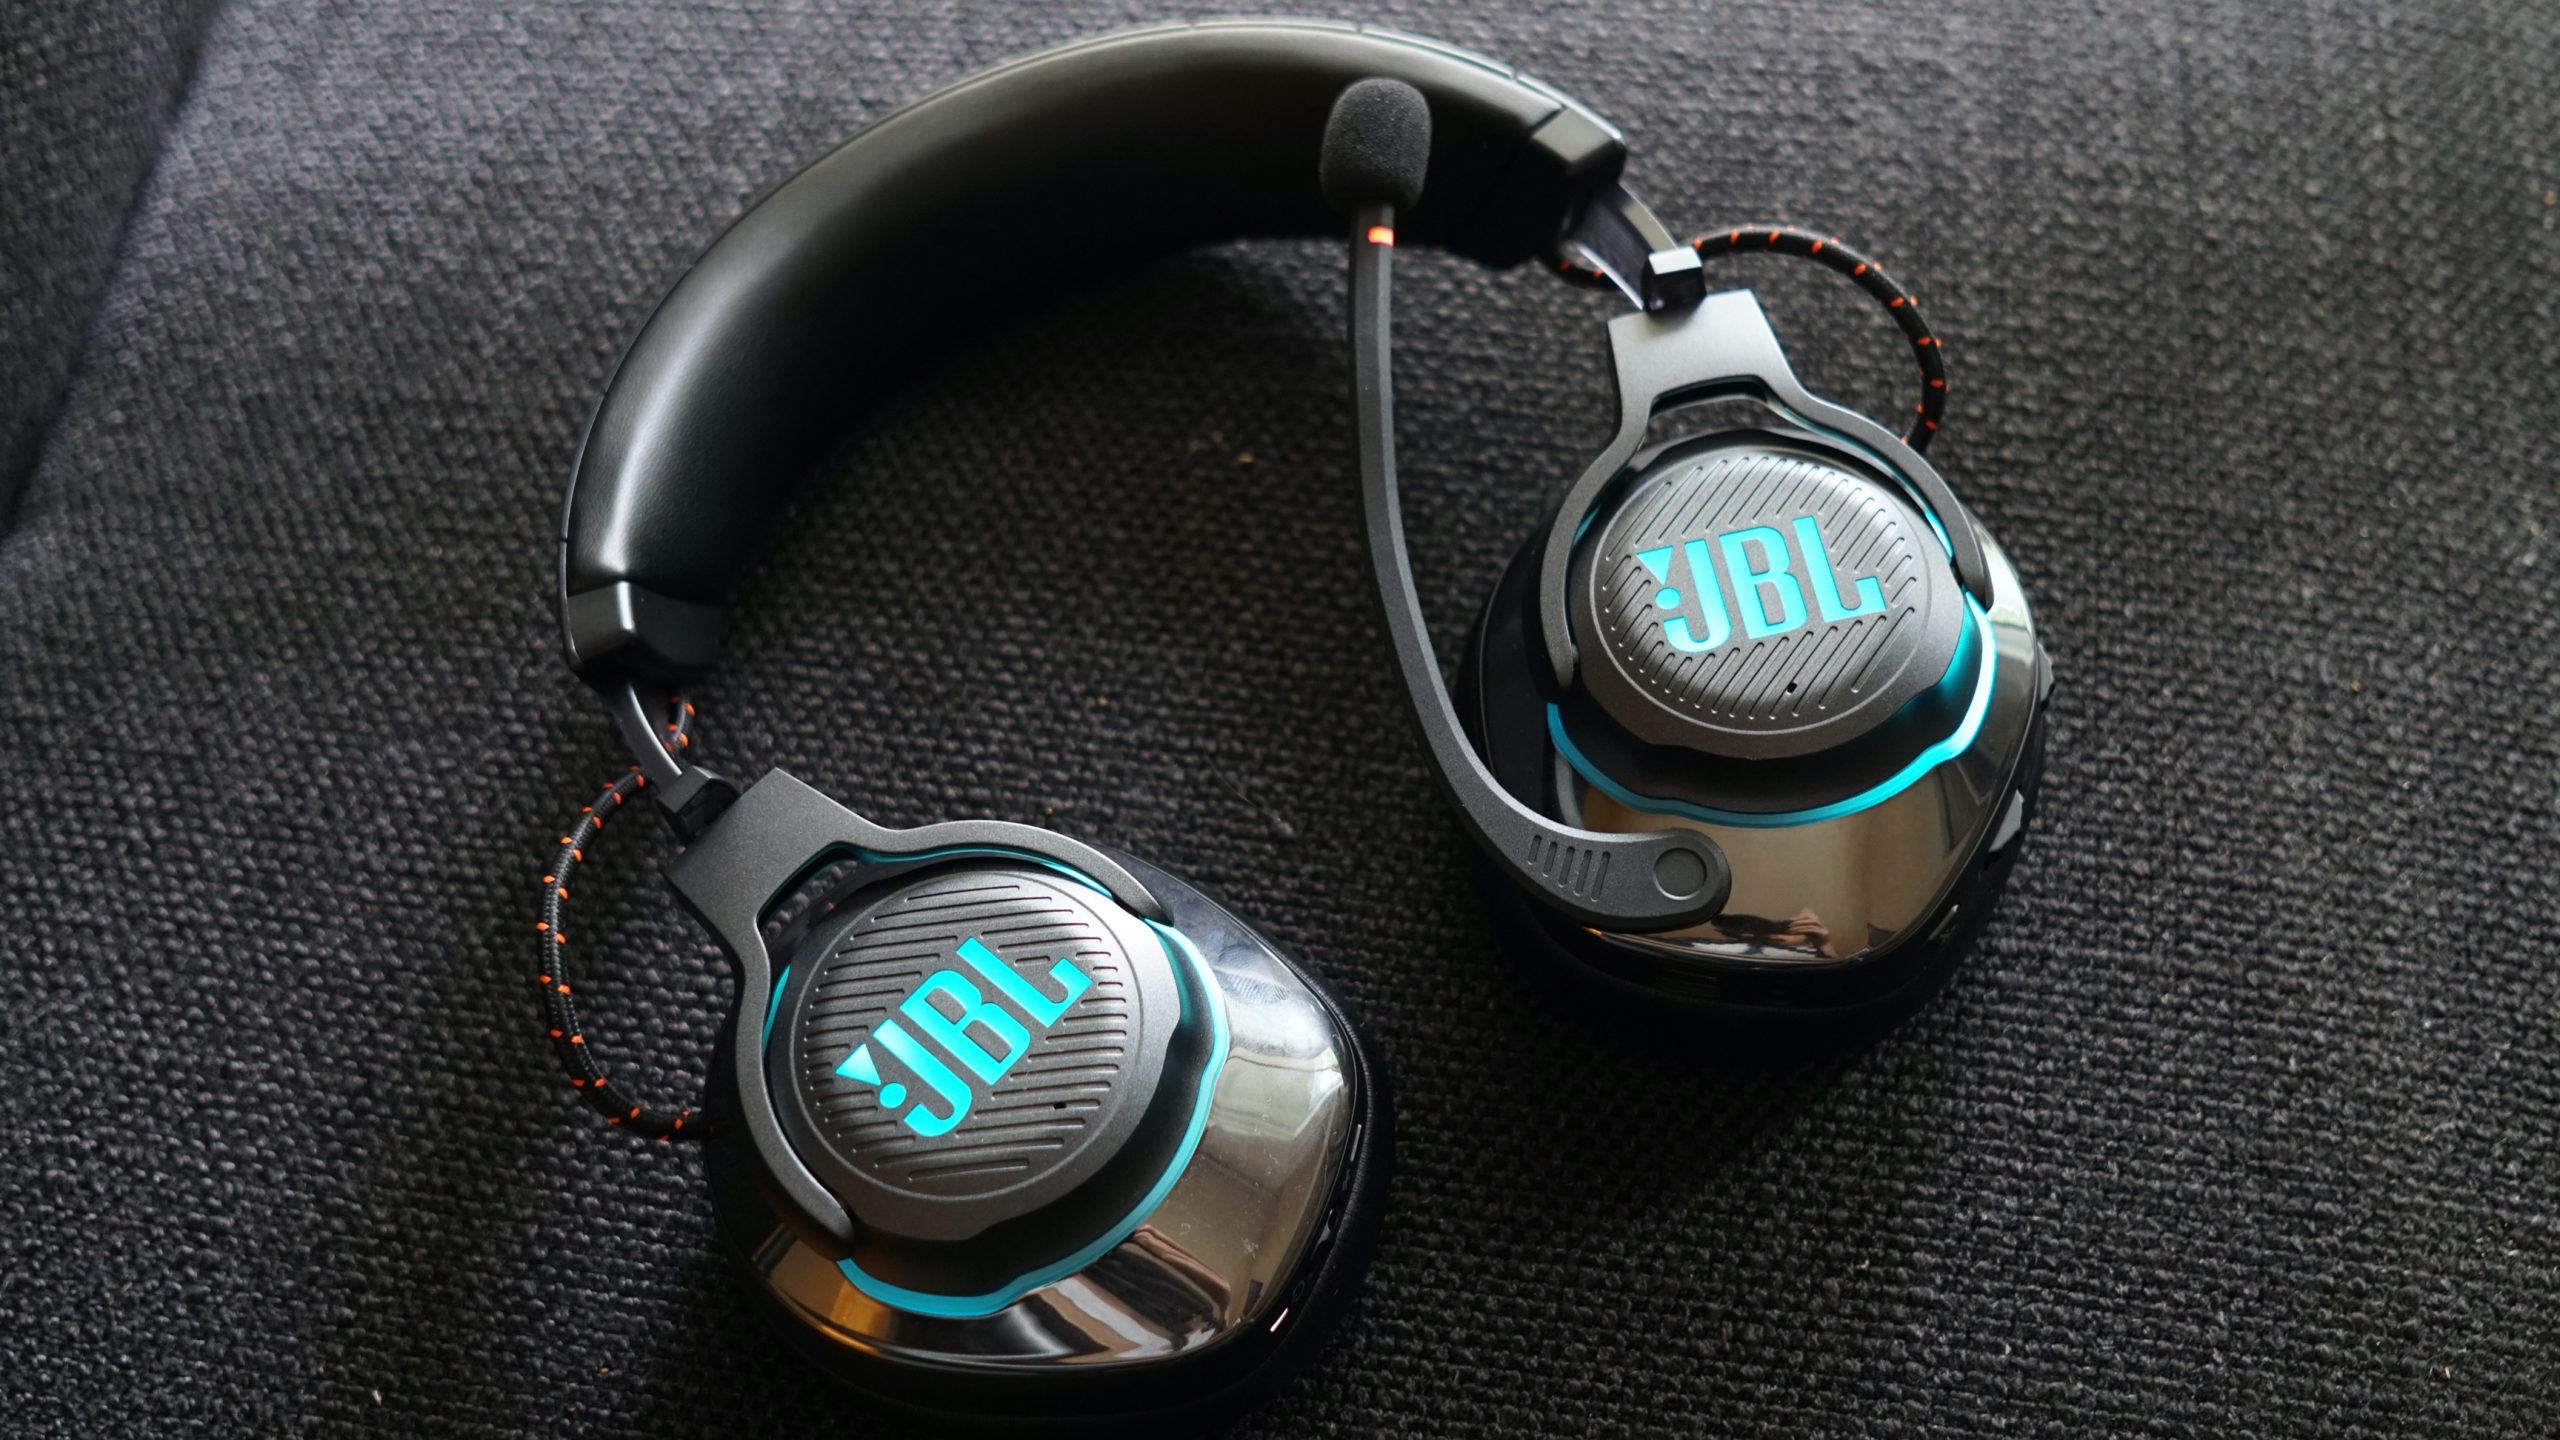 The JBL Quantum 800 gaming headset sits on a fabric surface.